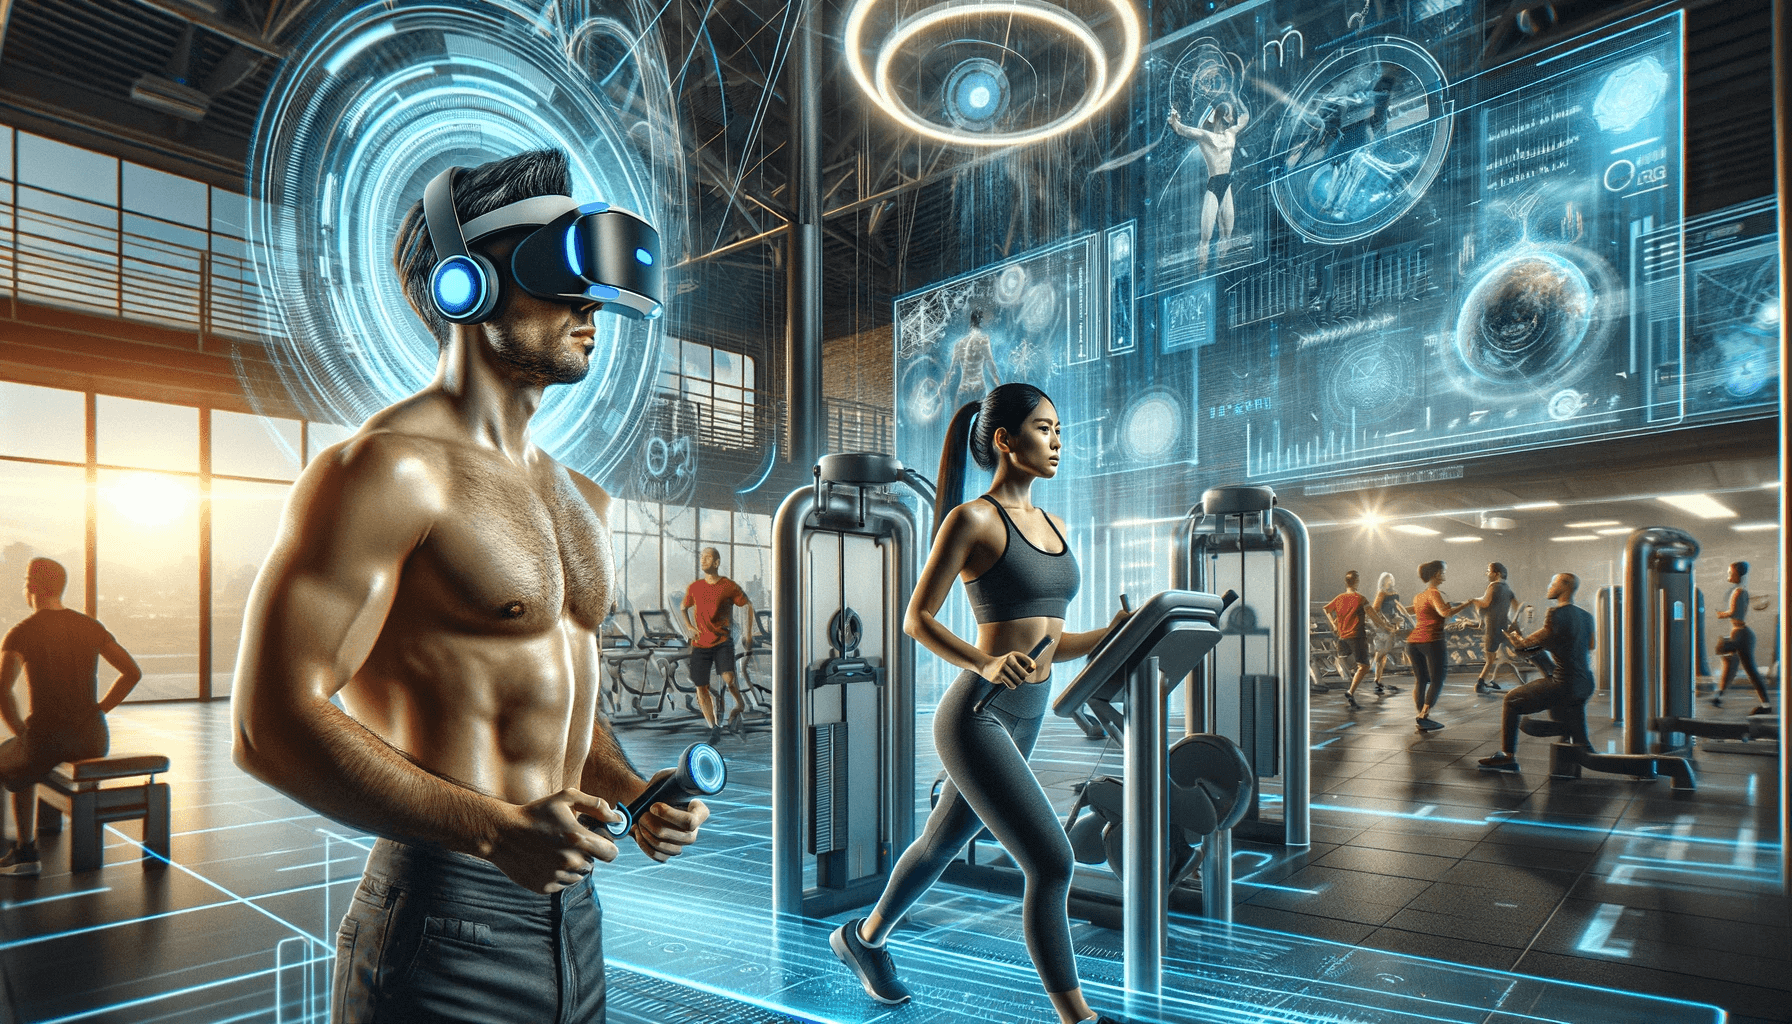 Innovations Unveiled Dreaming Big in the World of Fitness